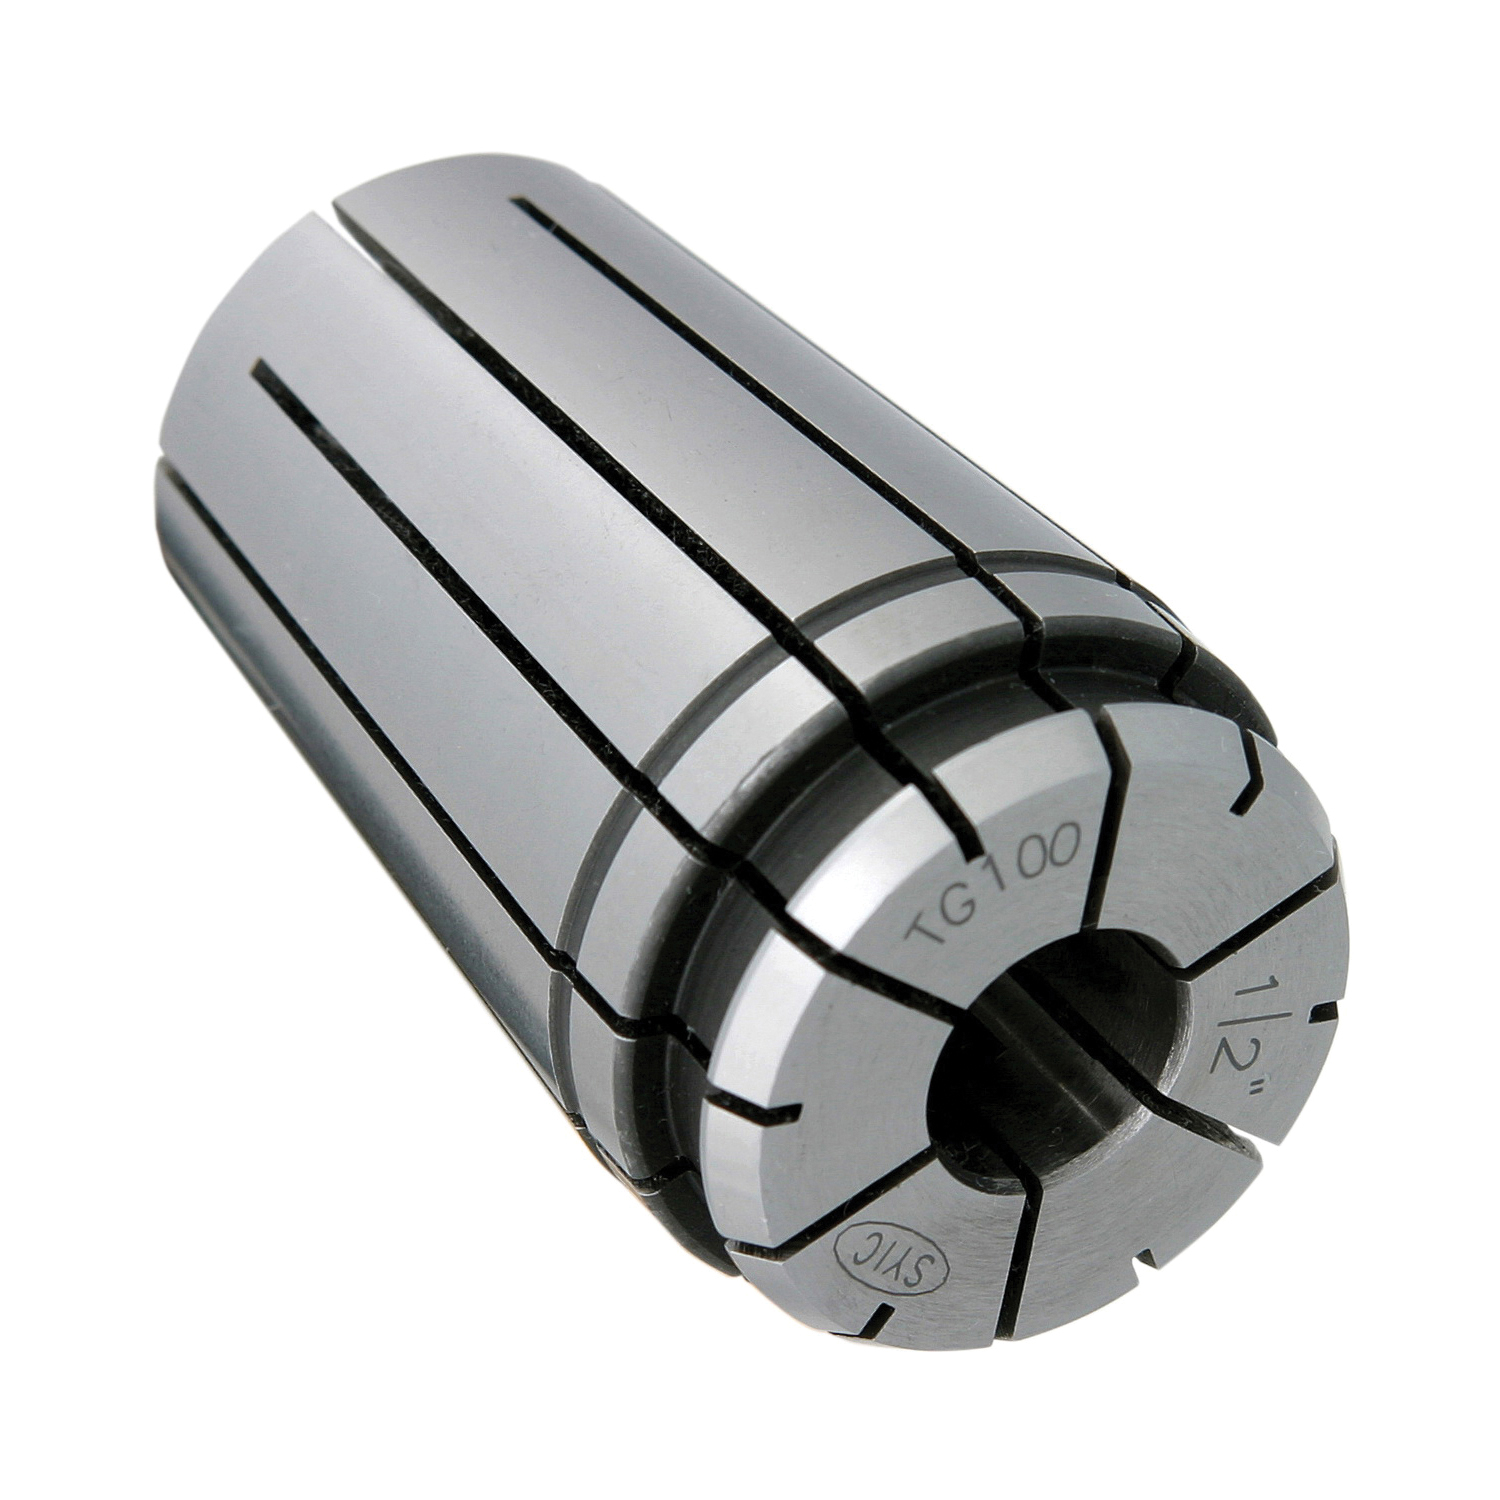 TG100 1/4" COLLET